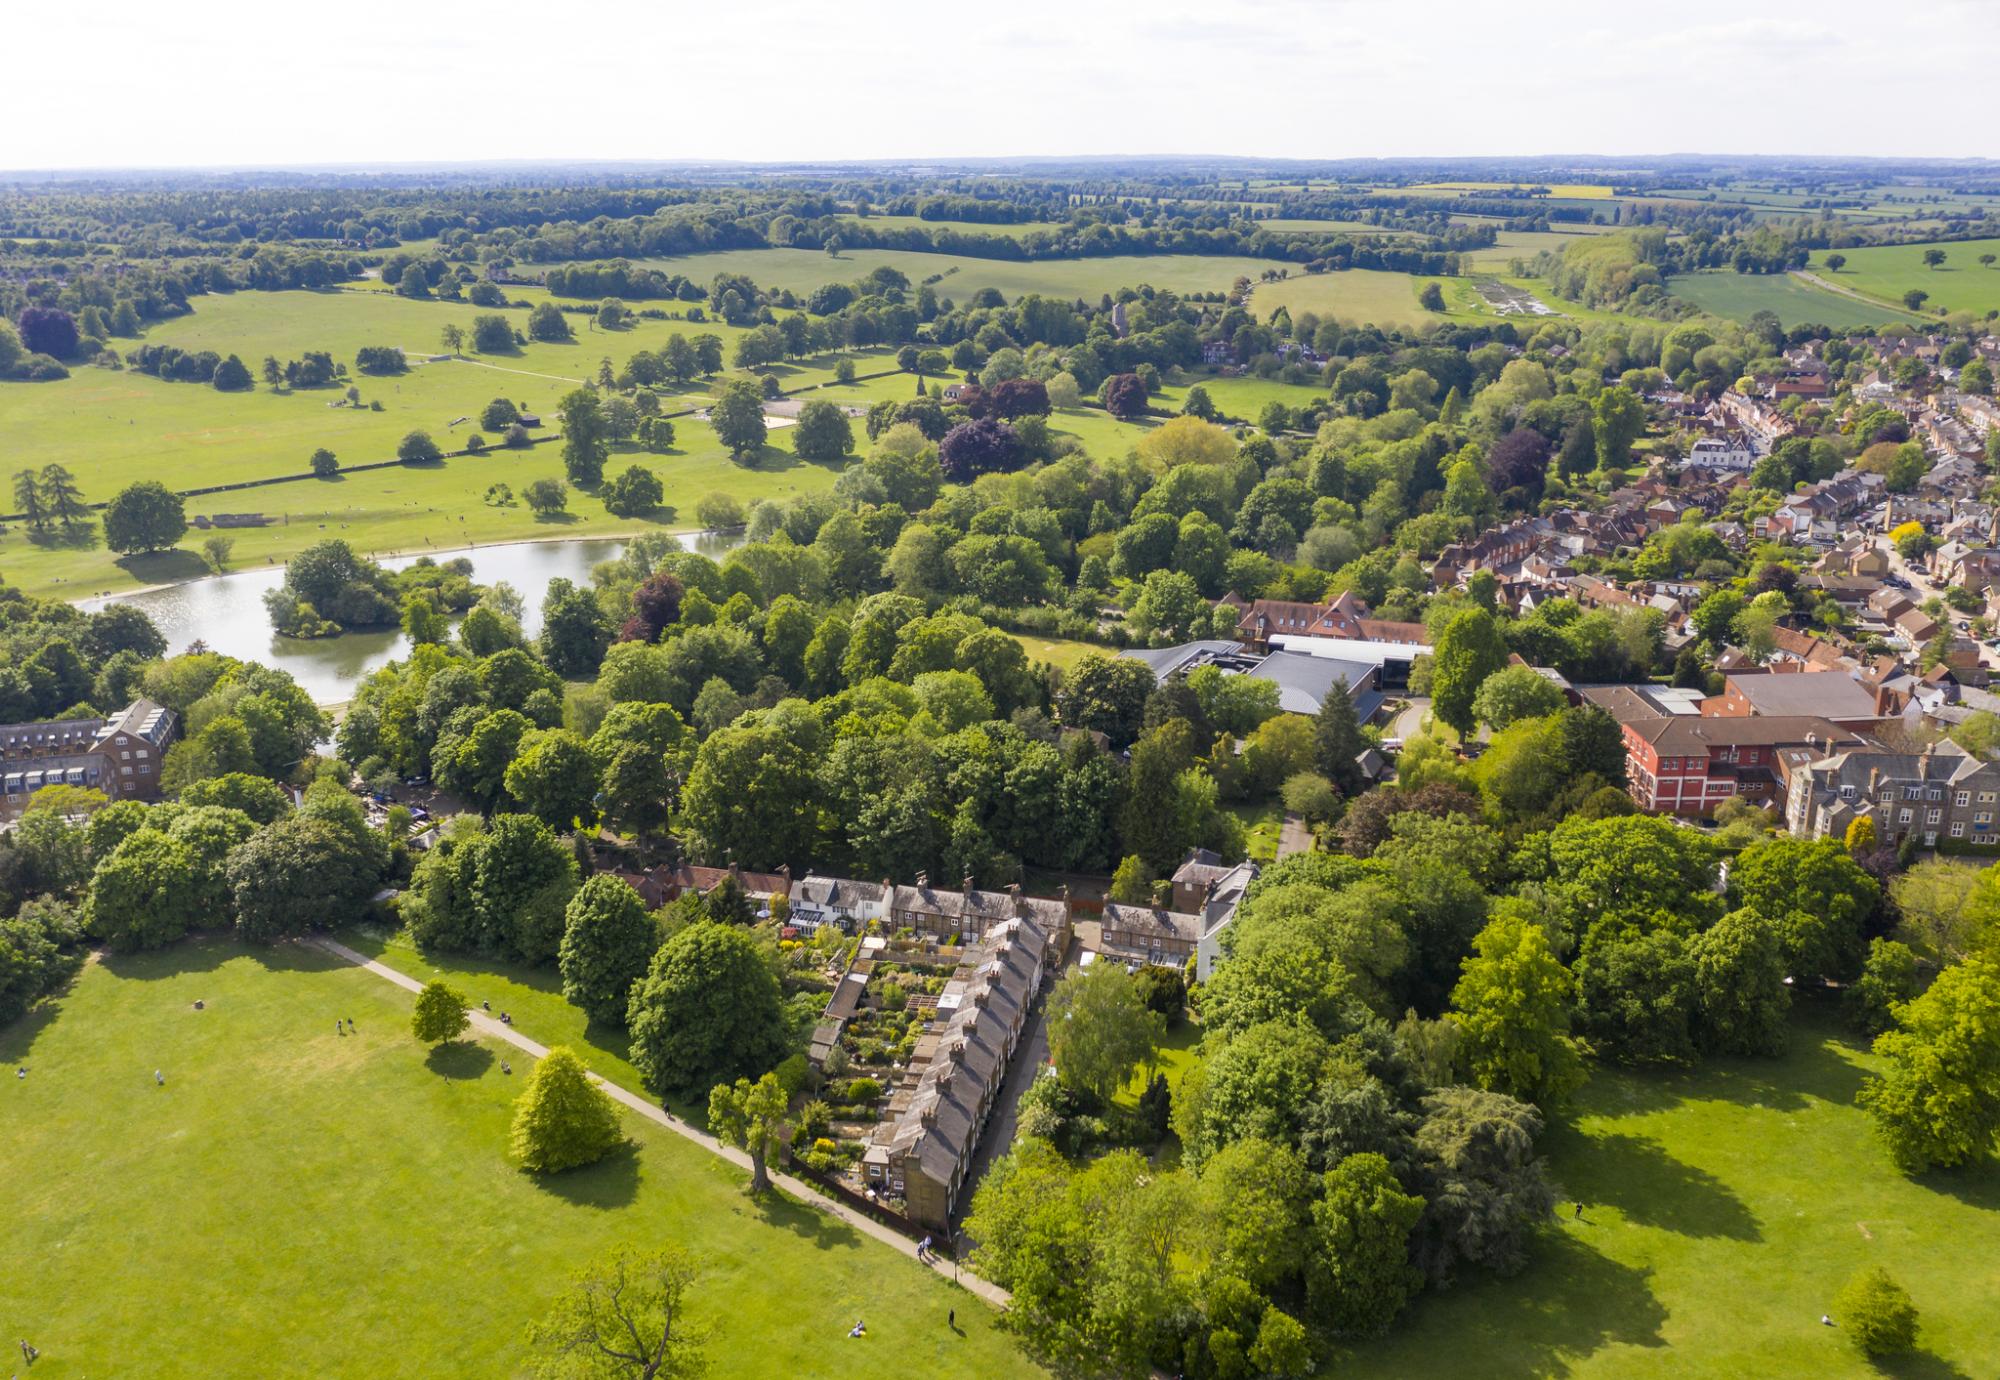 Aerial view of St Albans in Hertfordshire